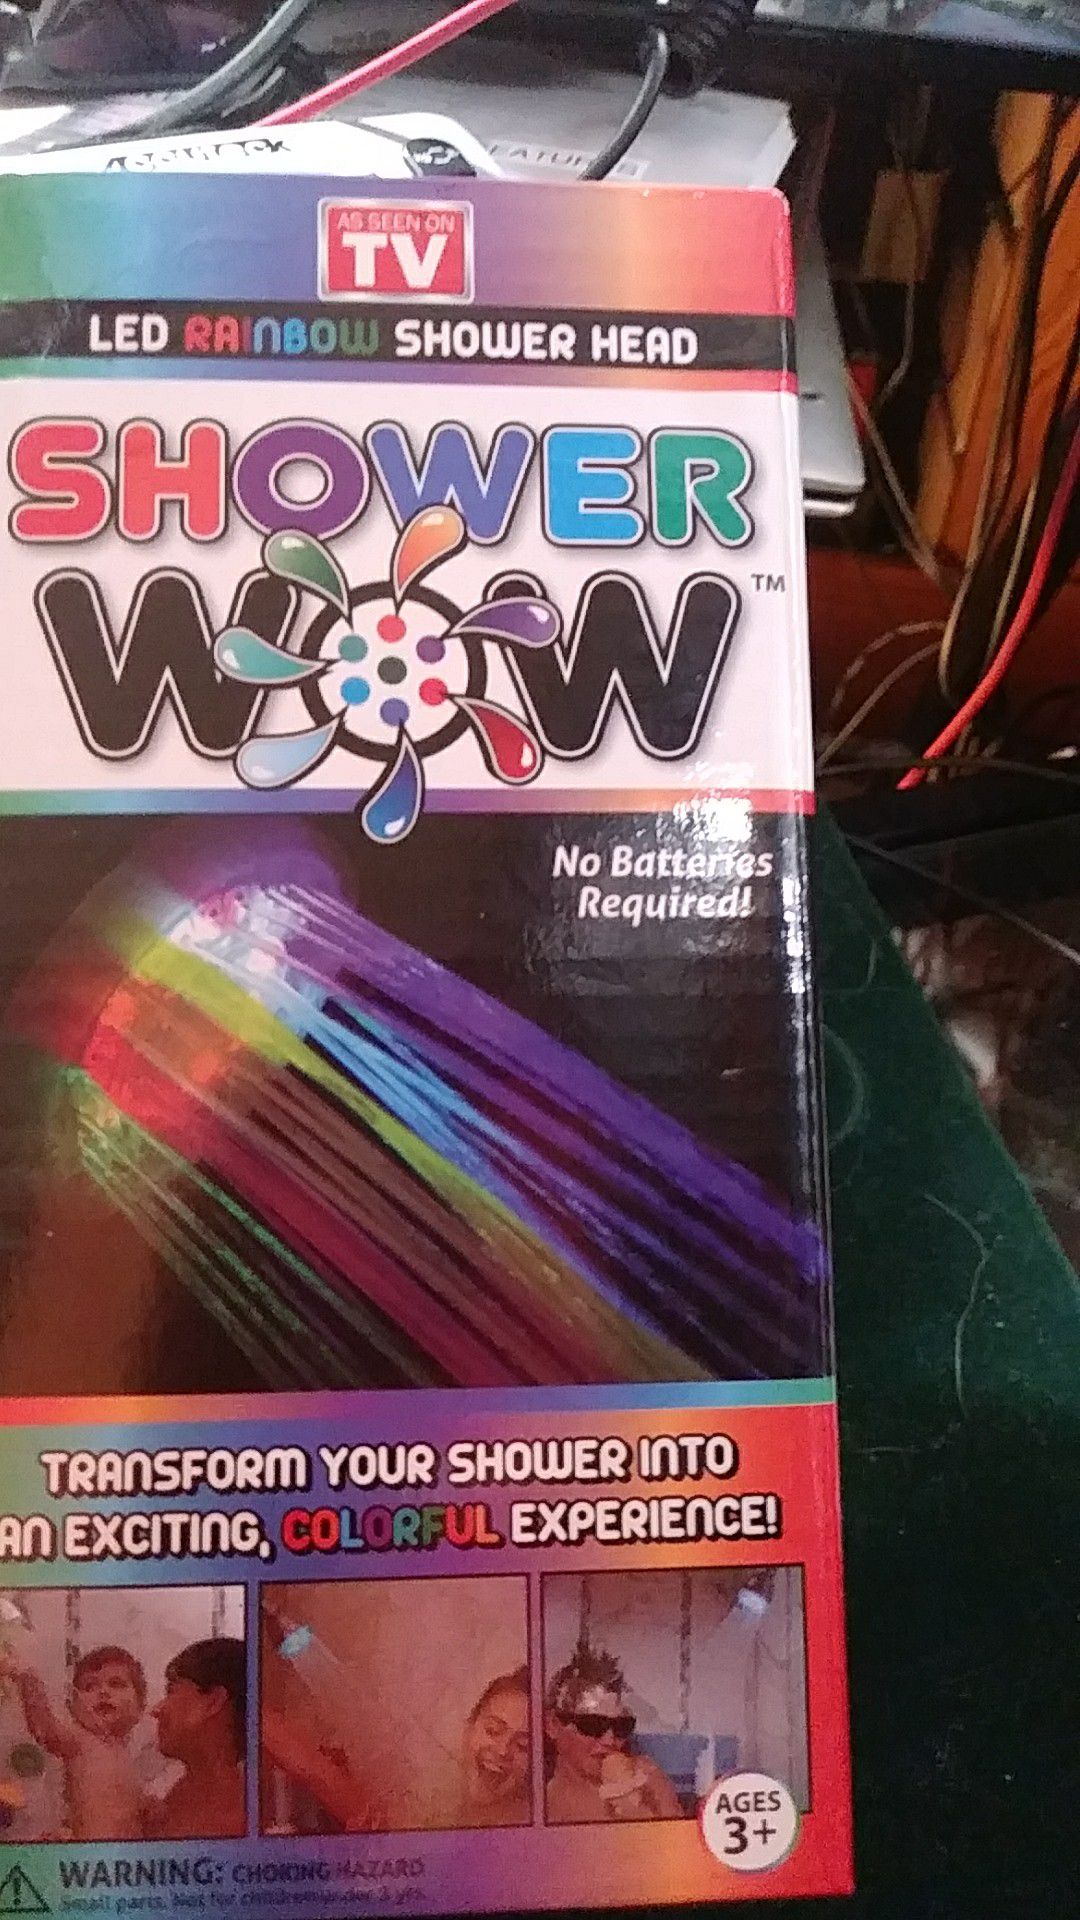 As Seen On TV shower wow LED rainbow shower head new in box